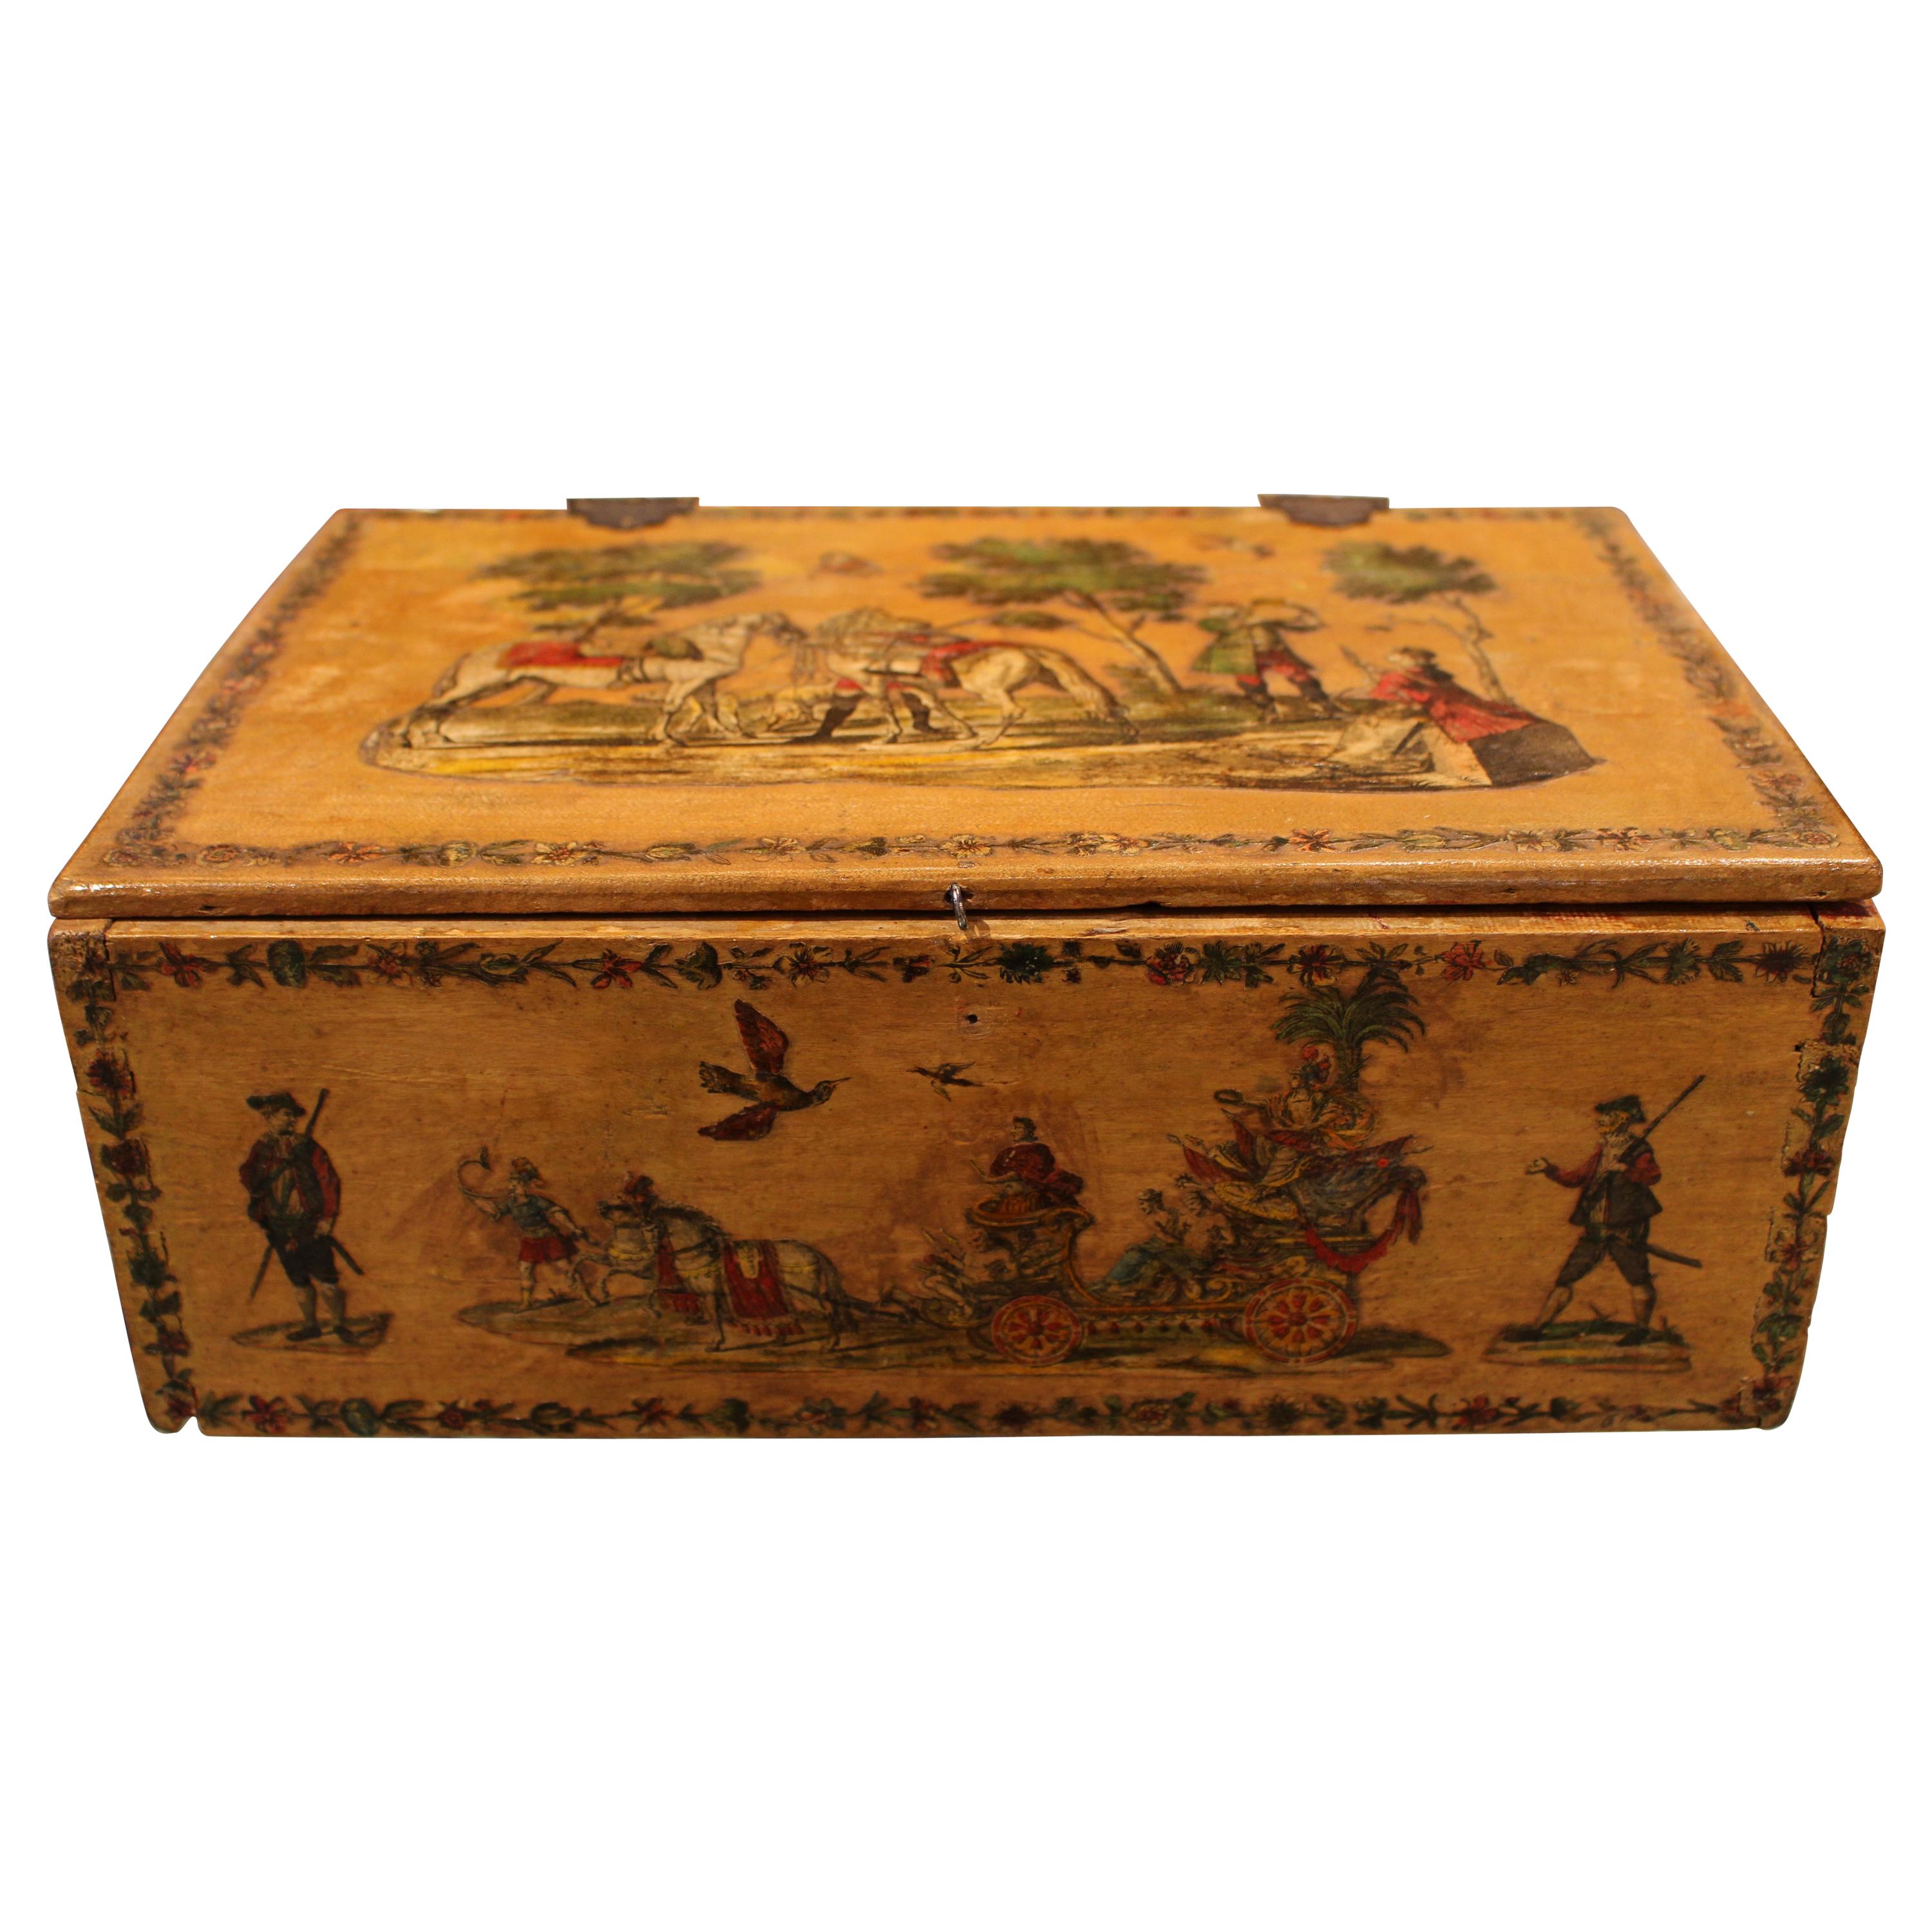 Beautifully Colored Decoupage Box with 17th Century Design Motif For Sale